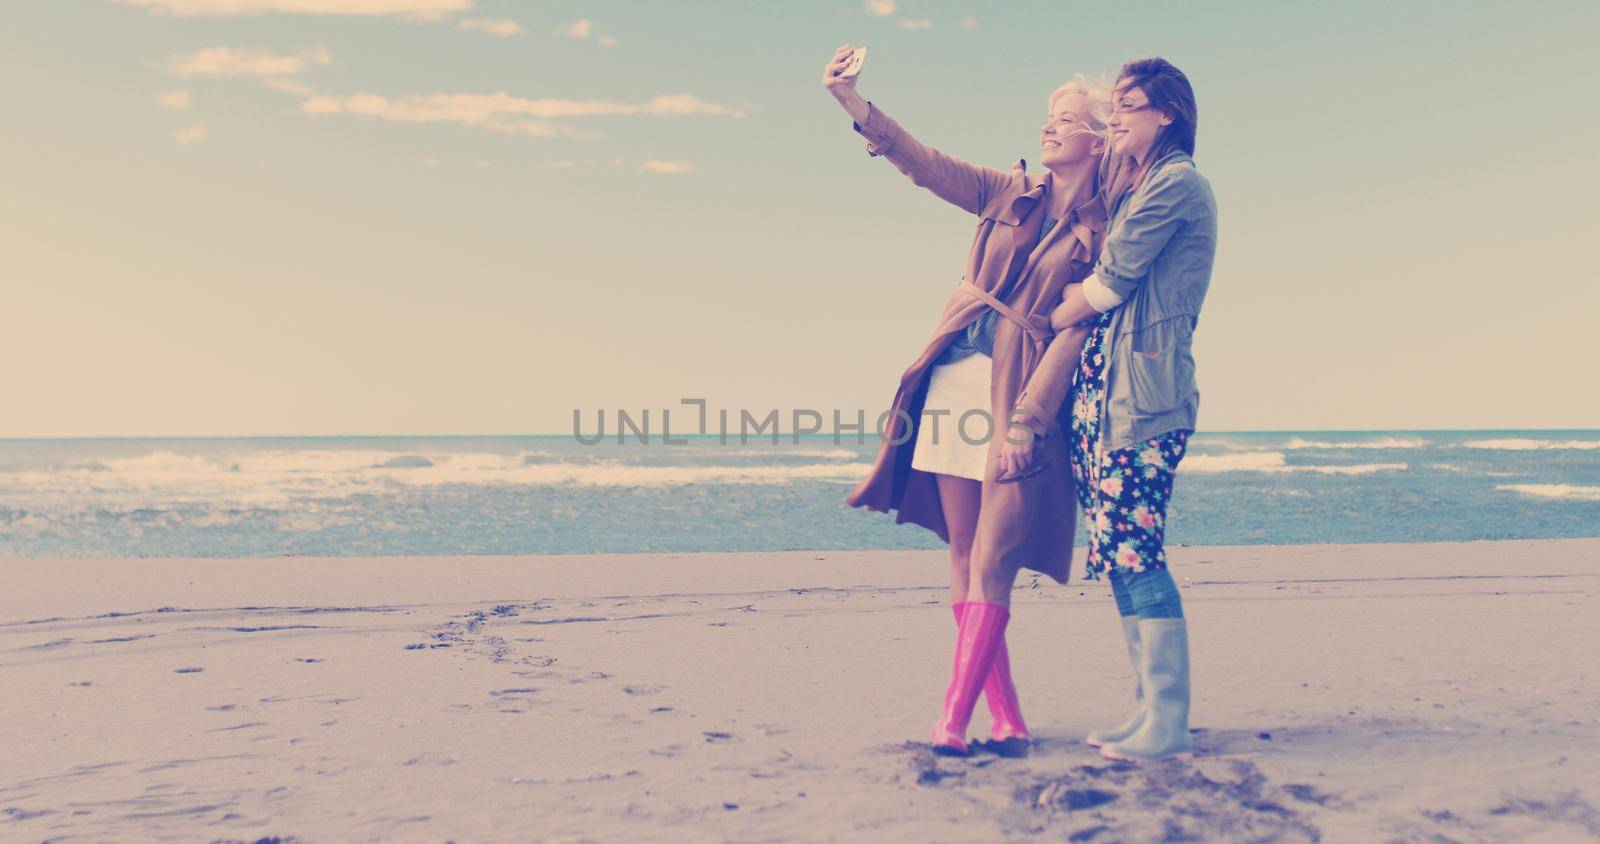 Friends making selfie. two beautiful young women making selfie at autumn day on the beach